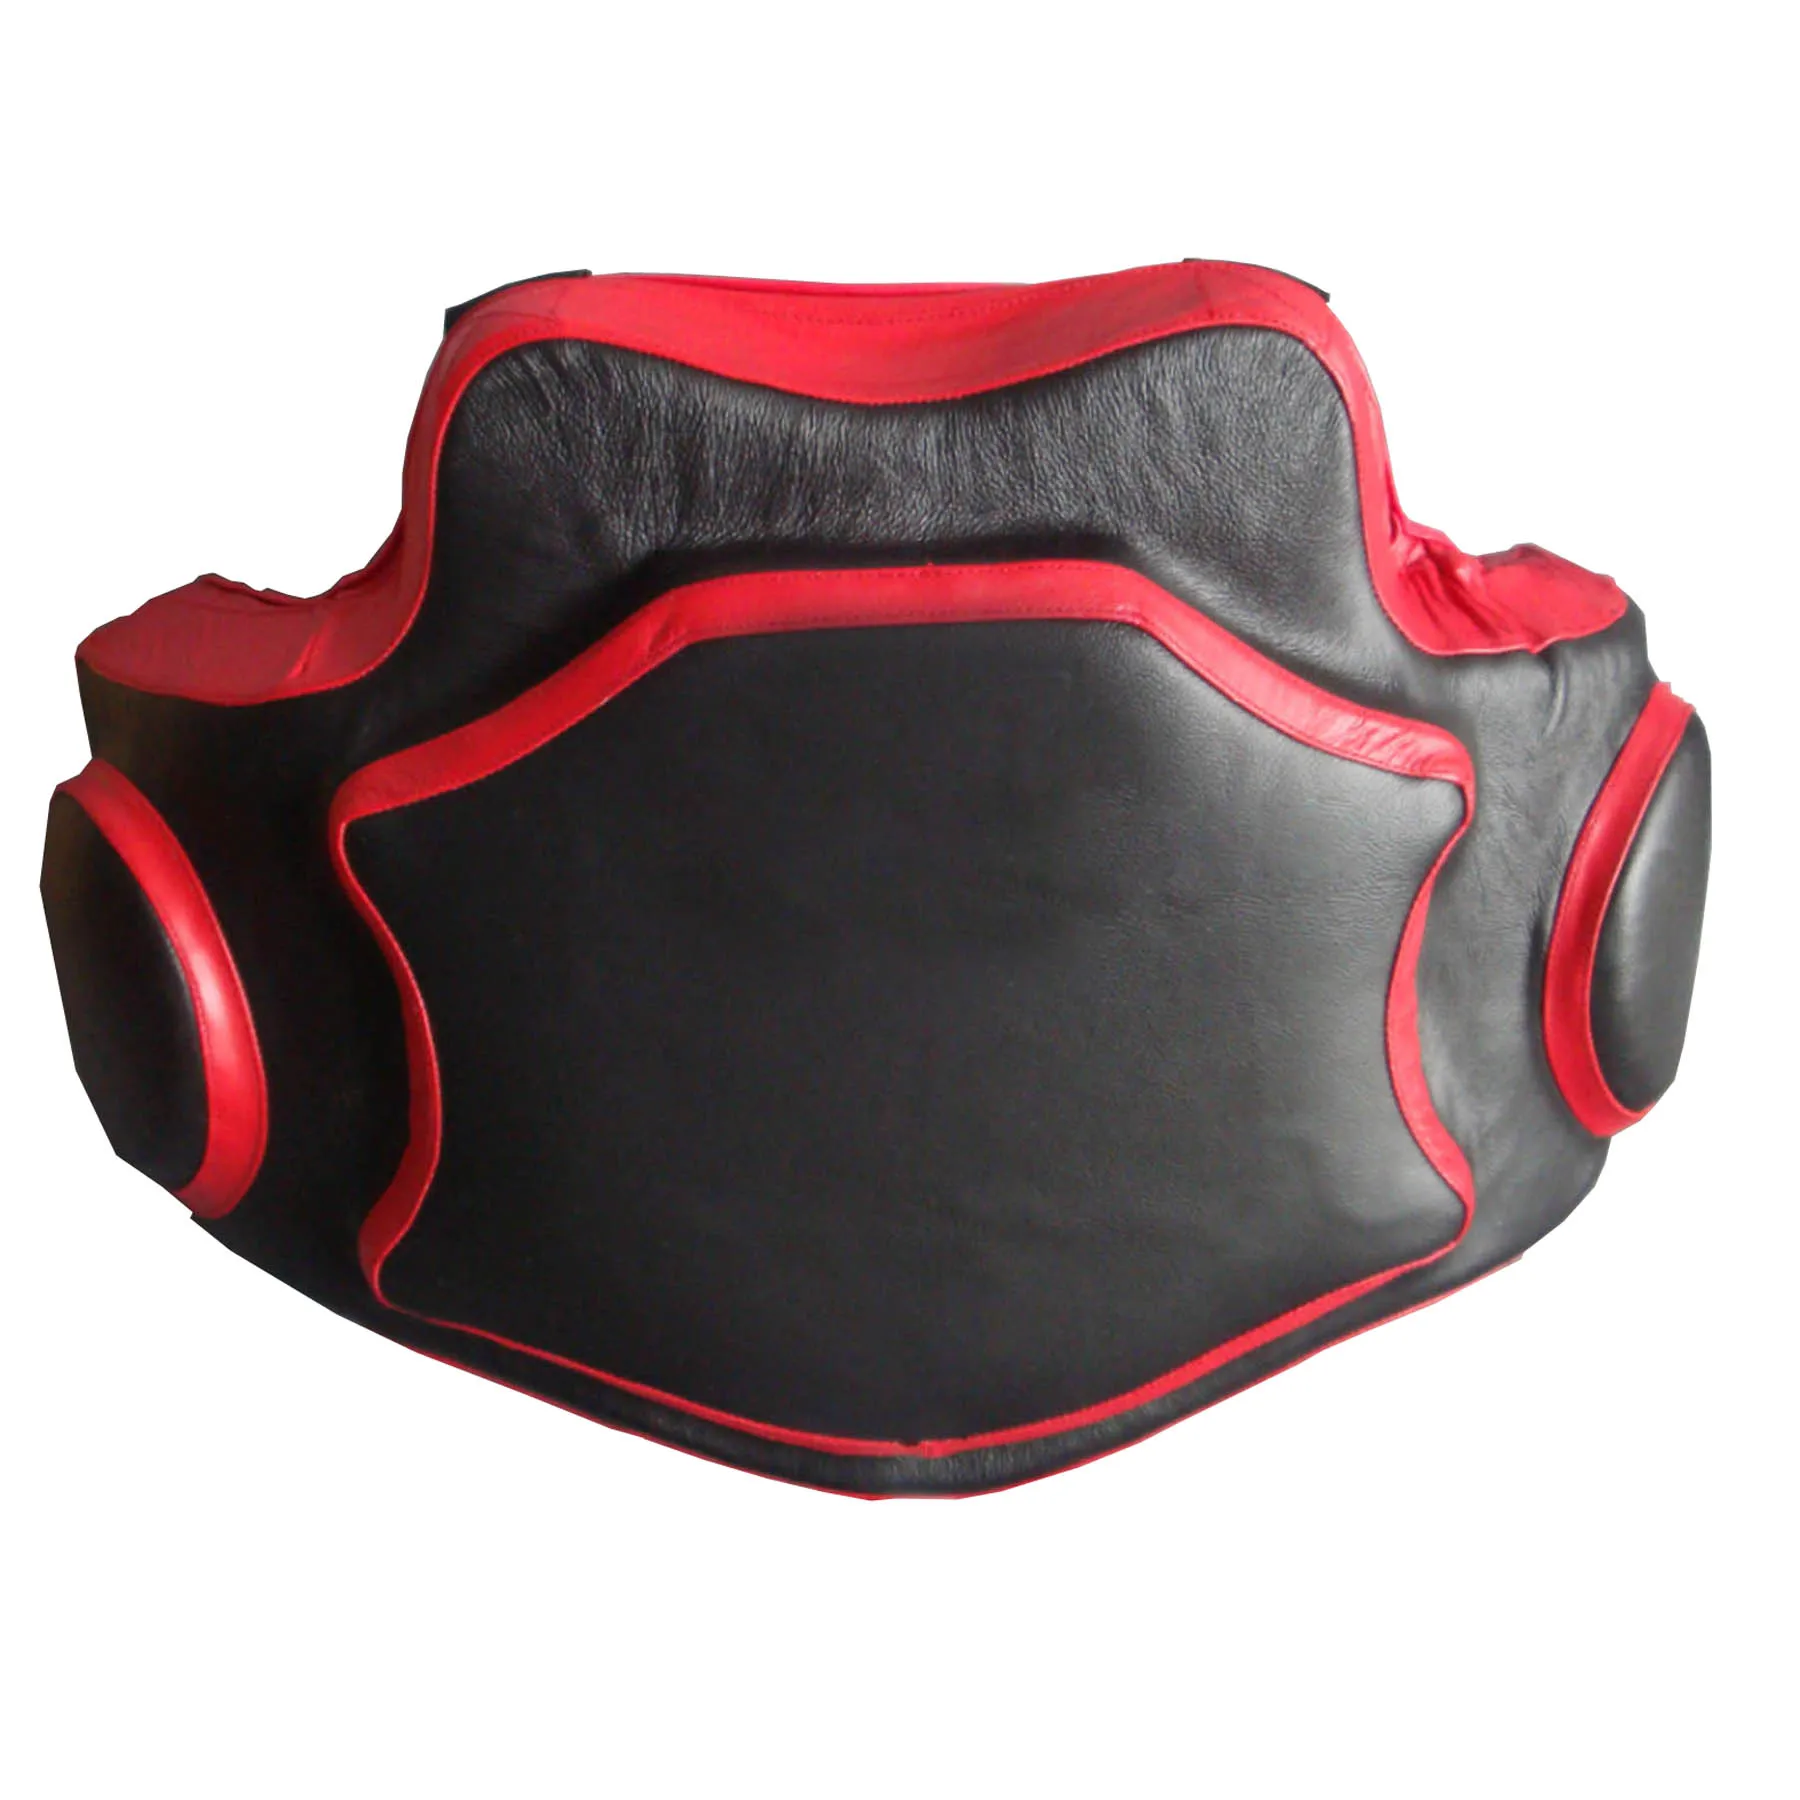 Details about   WINDY MUAY THAI BOXING BAR BREAST PROTECTION BLACK KICK BOXING MMA K1 